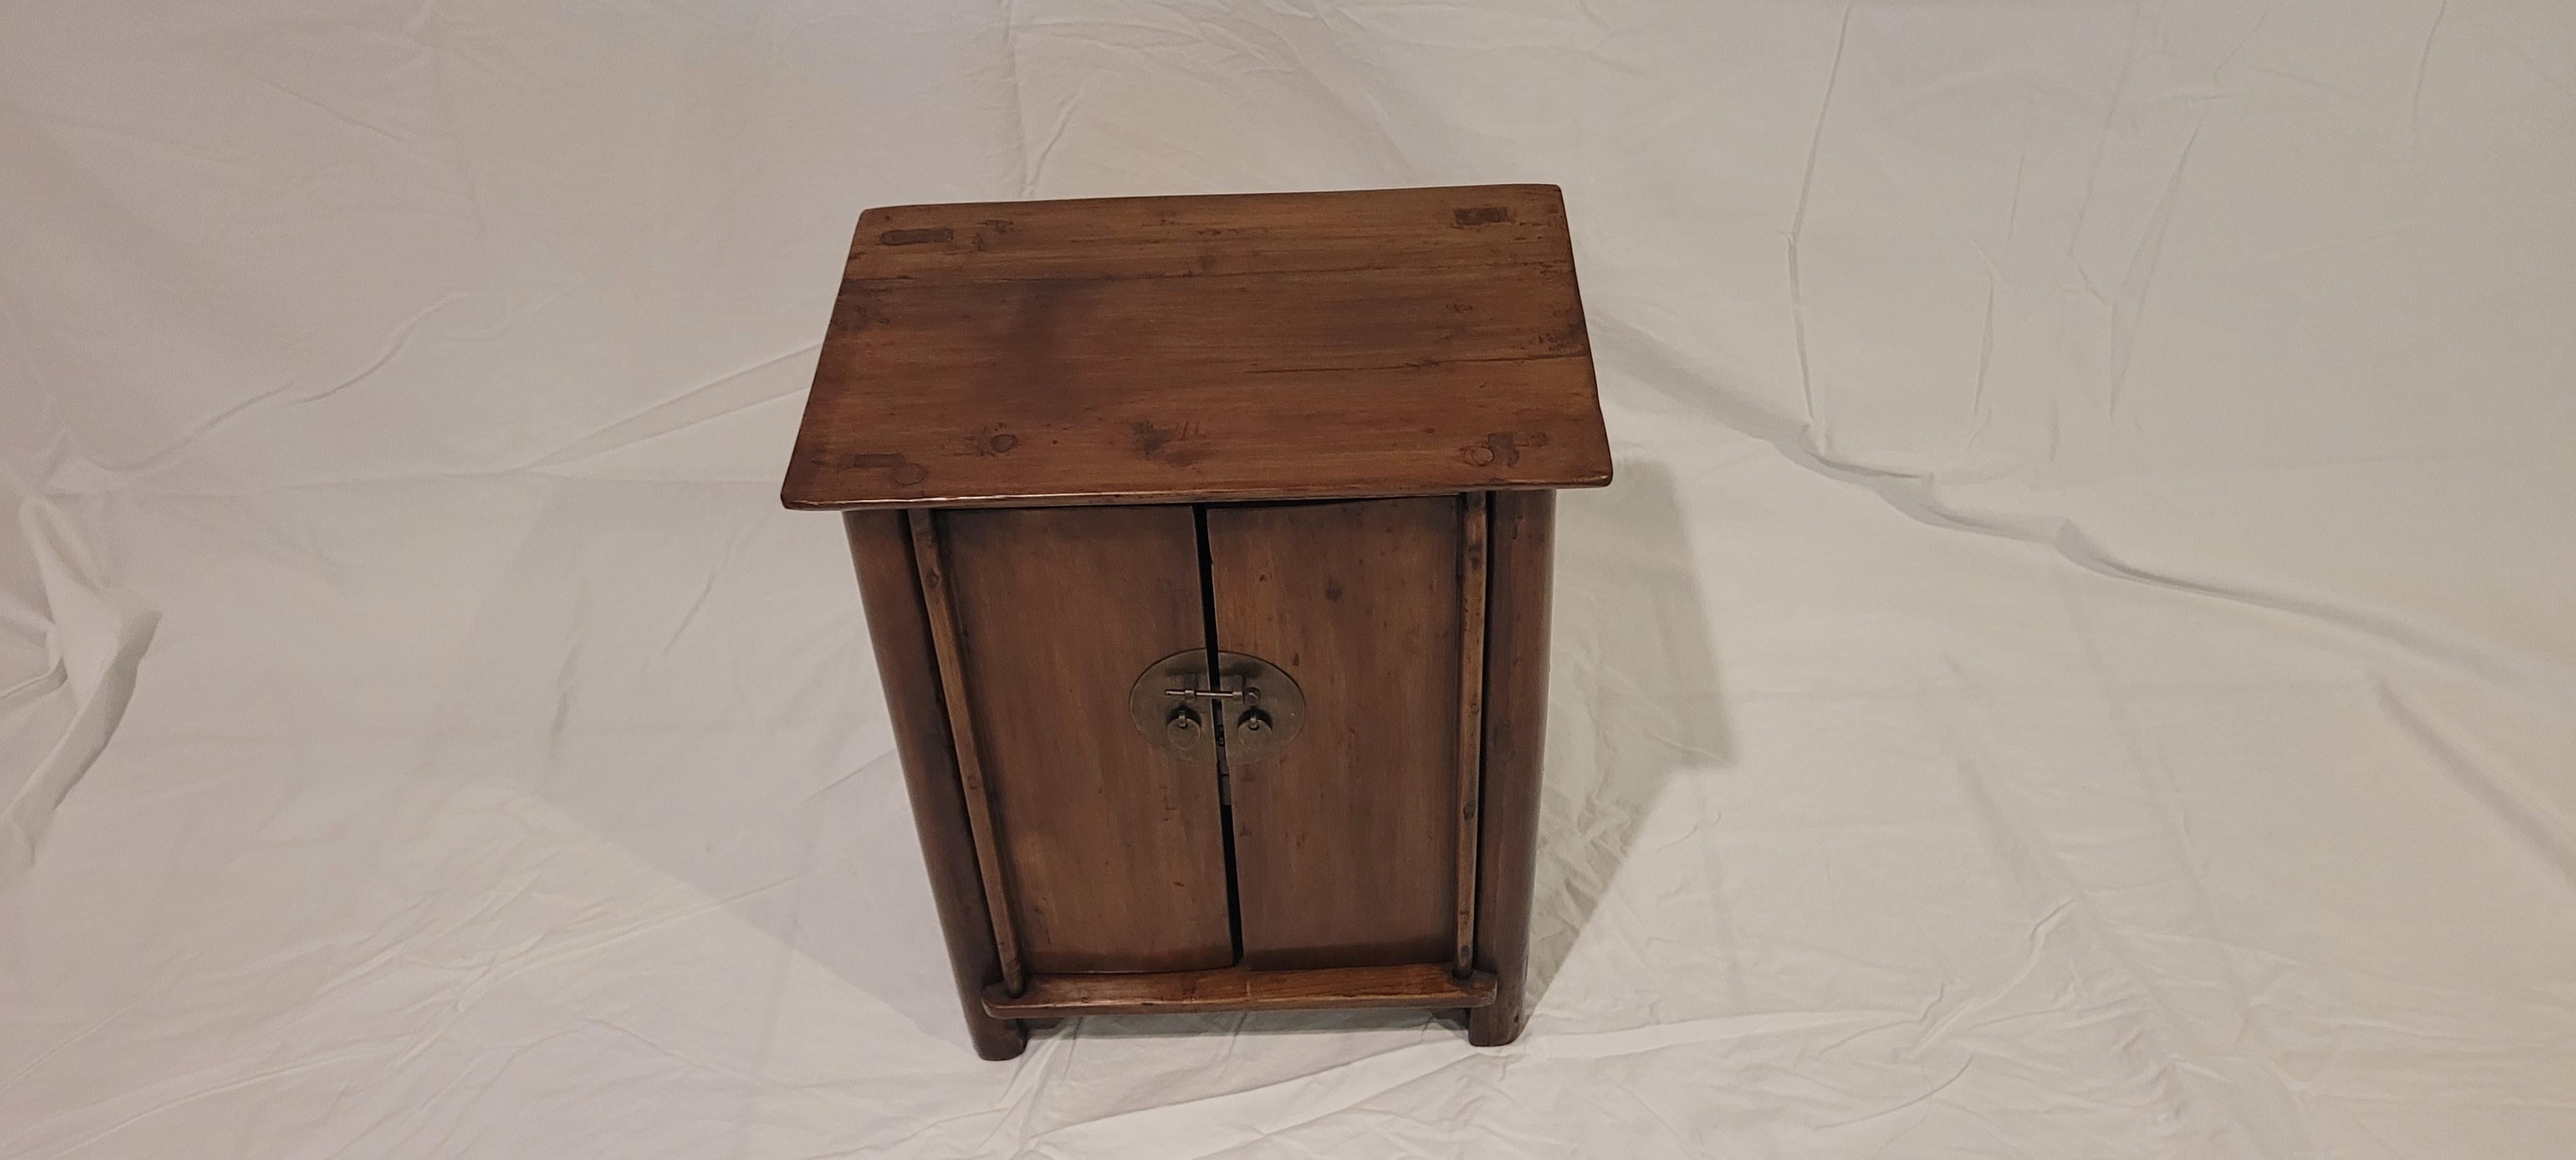 19th Century Small Kang Cabinet For Sale 4